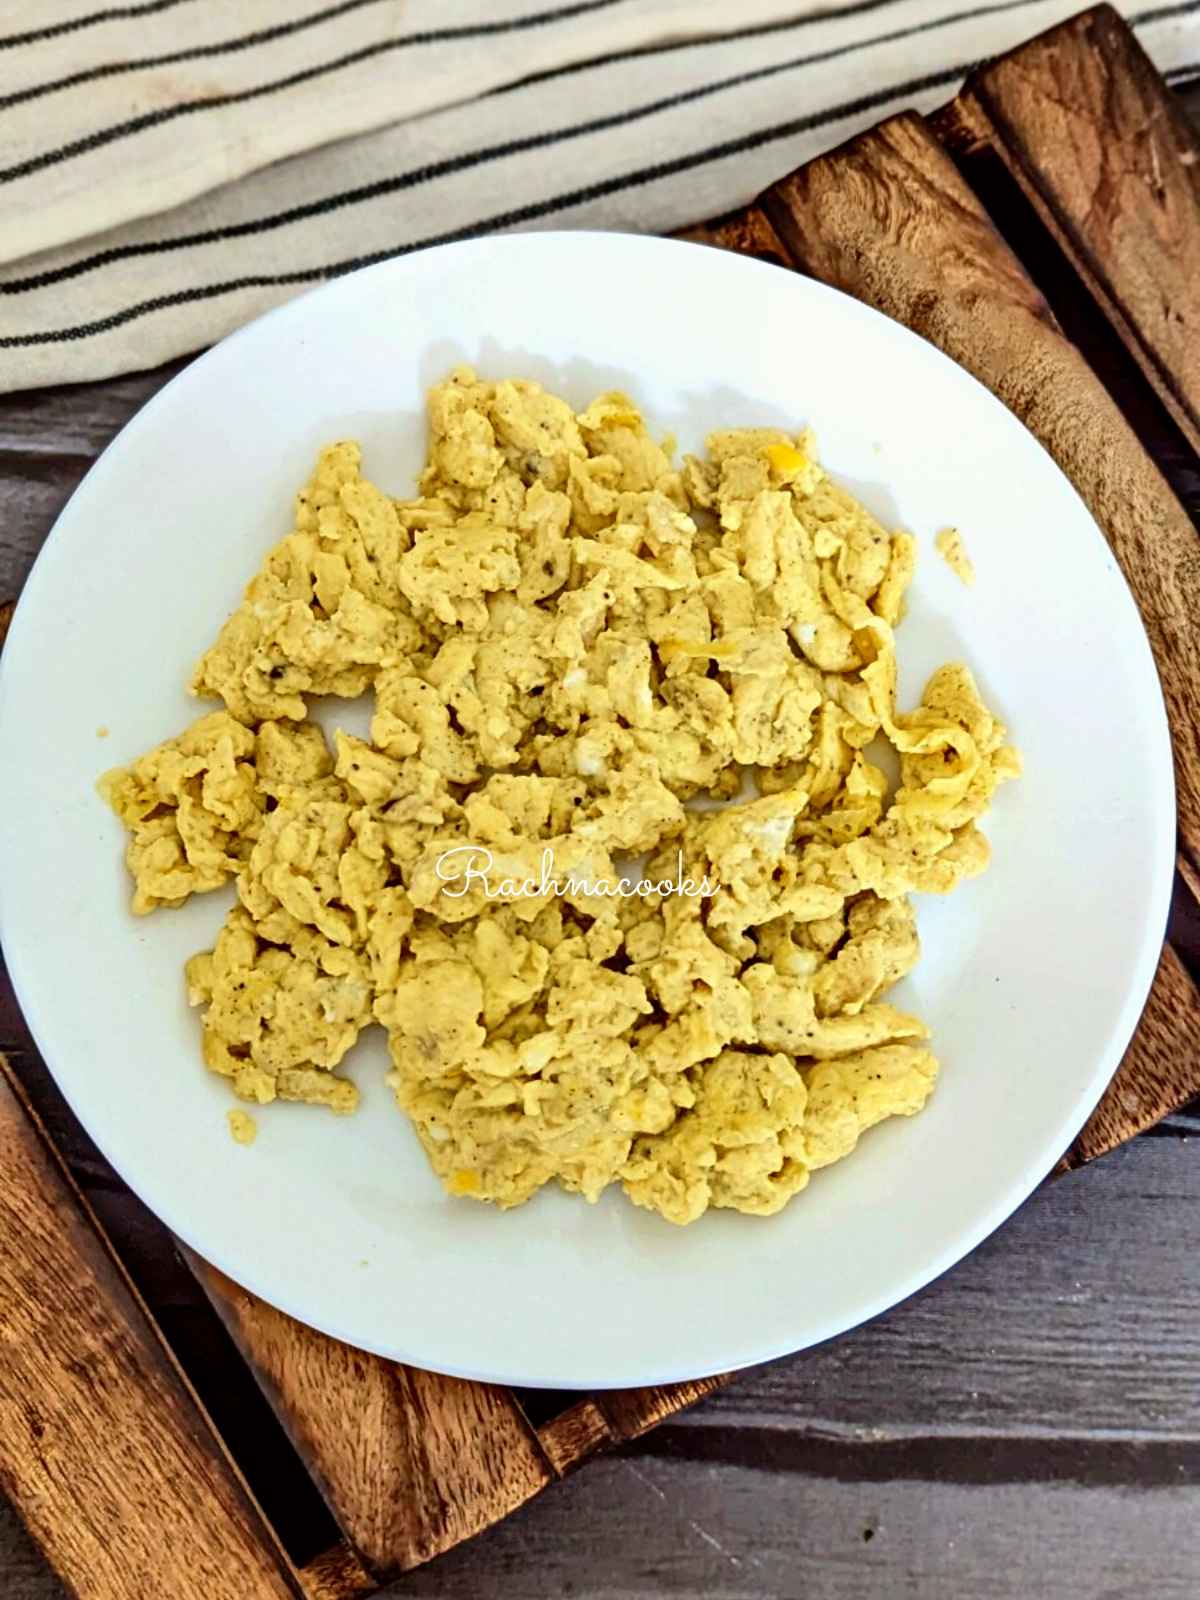 Scrambled eggs served on a white plate.